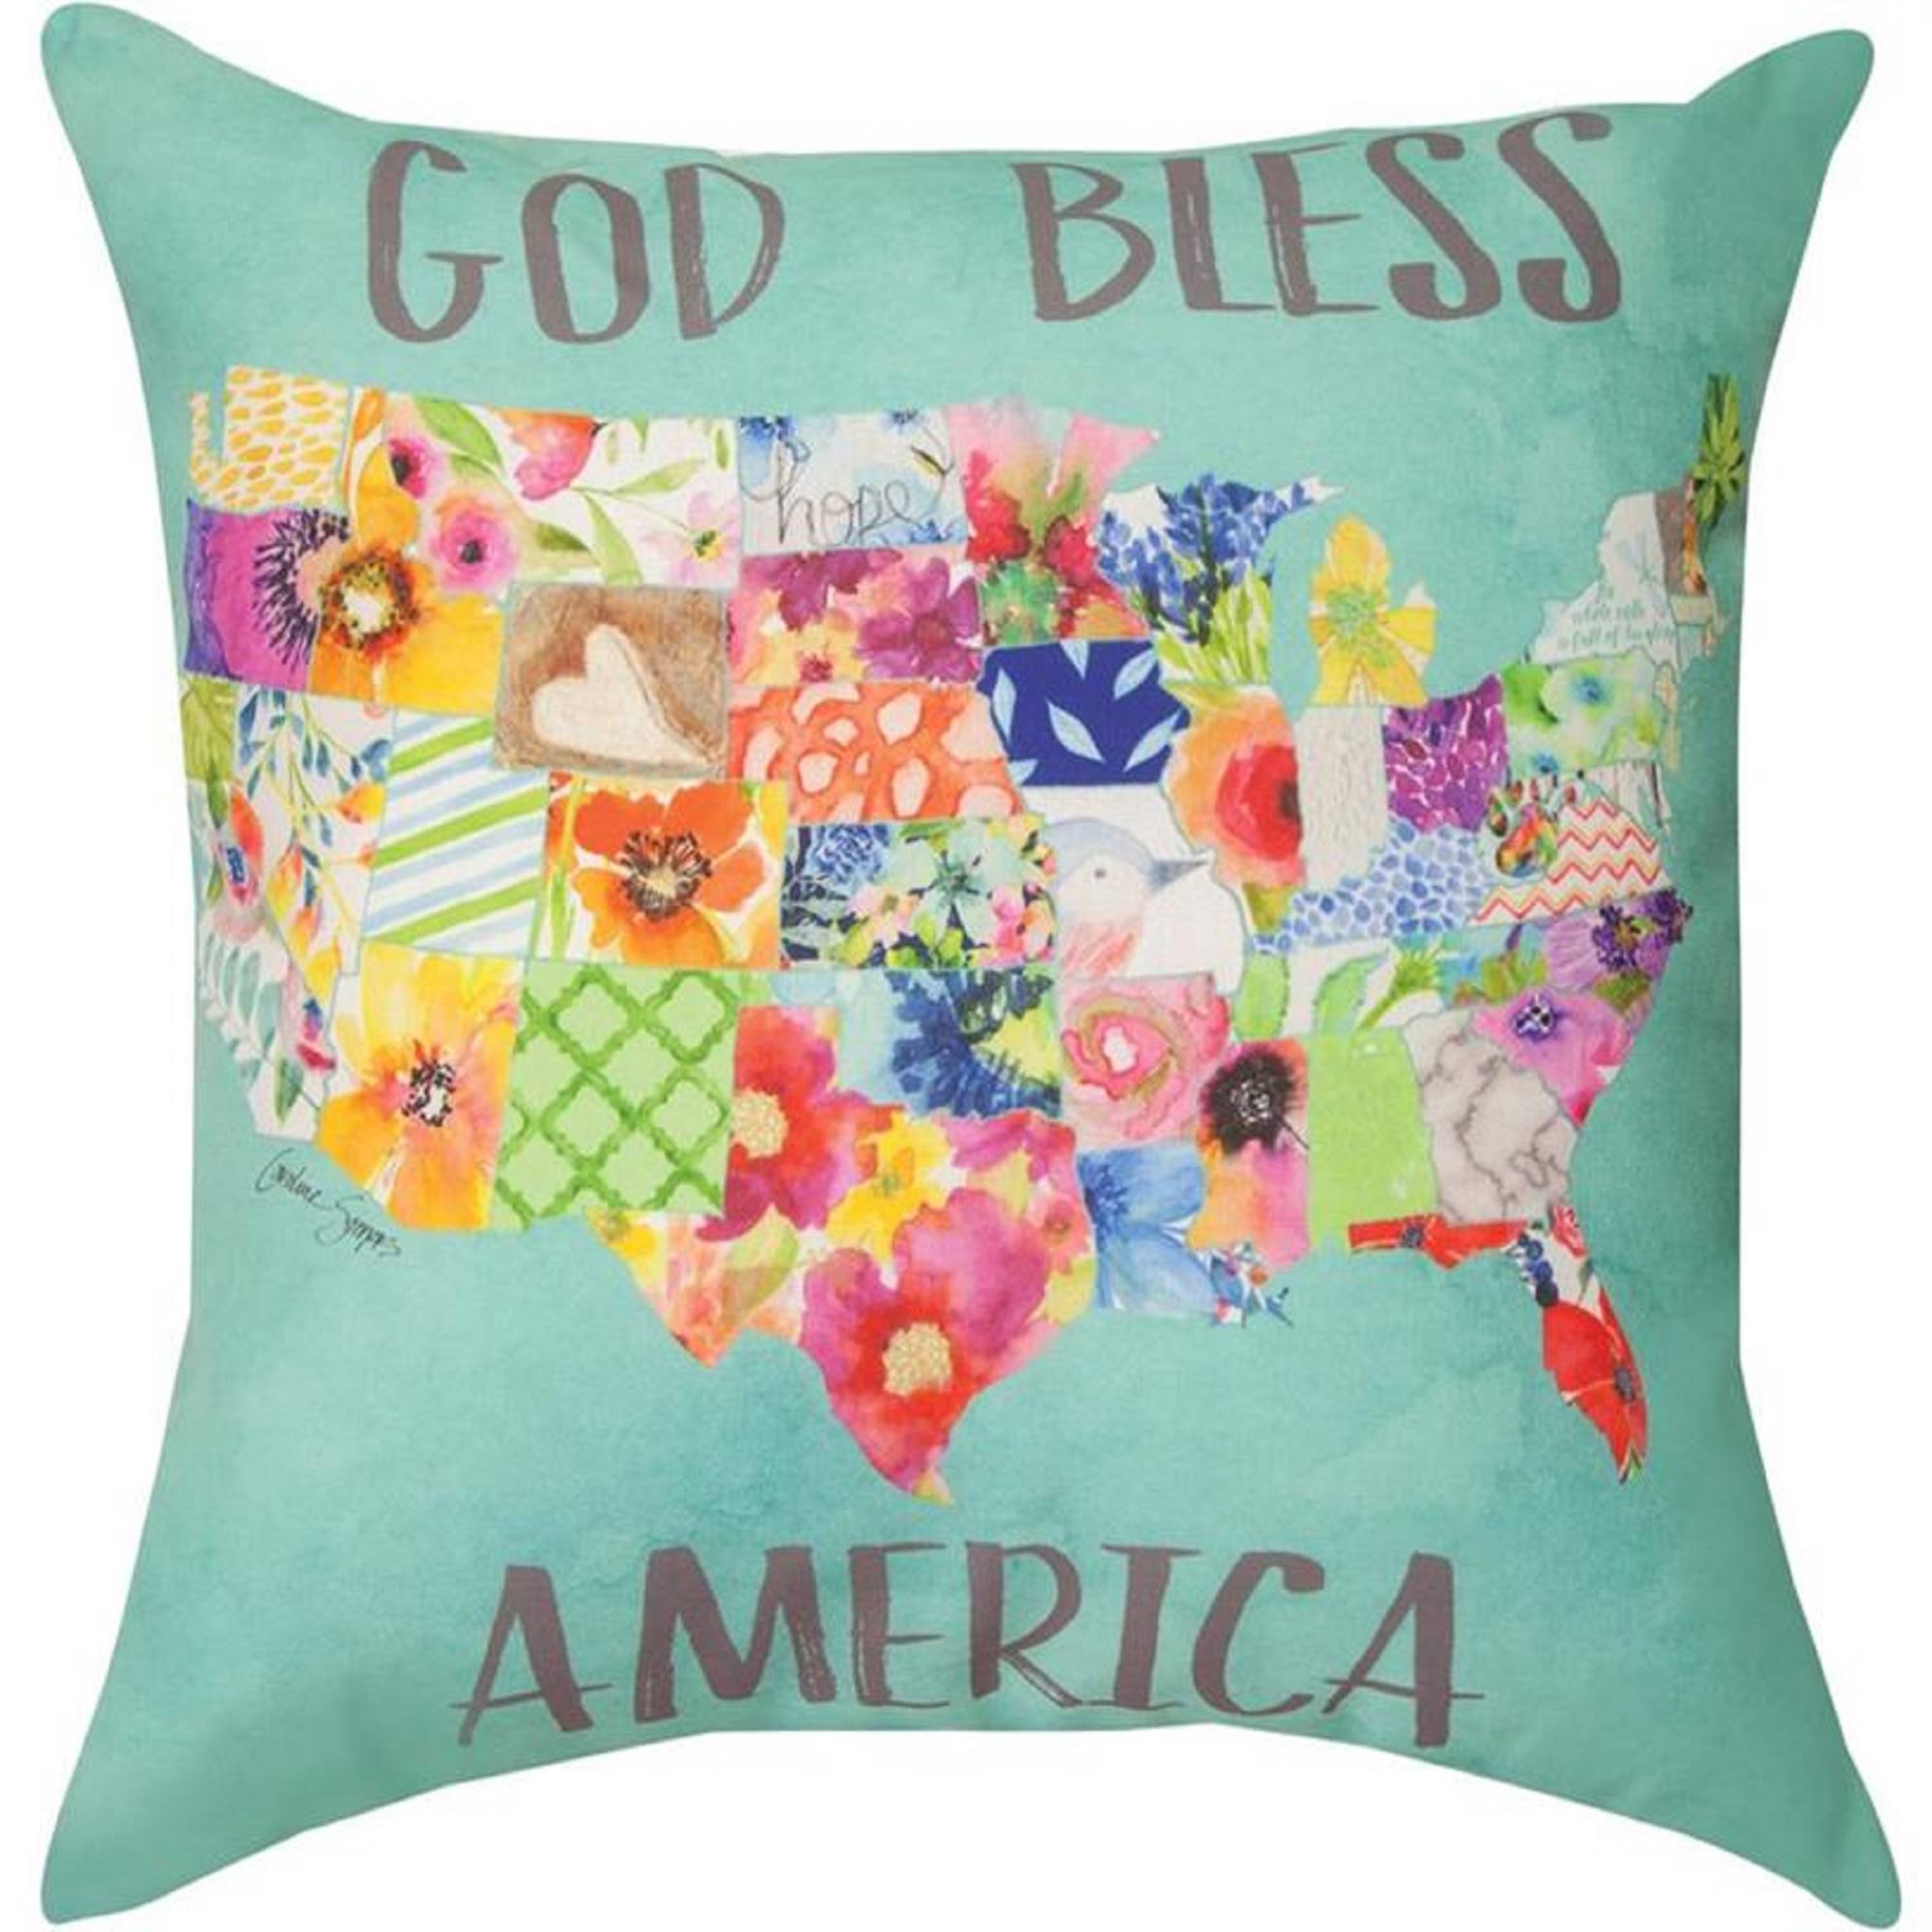 Manual Woodworkers & Weavers SLWGBA 18 x 18 in. Wonderful World God Bless America SIM Pillow